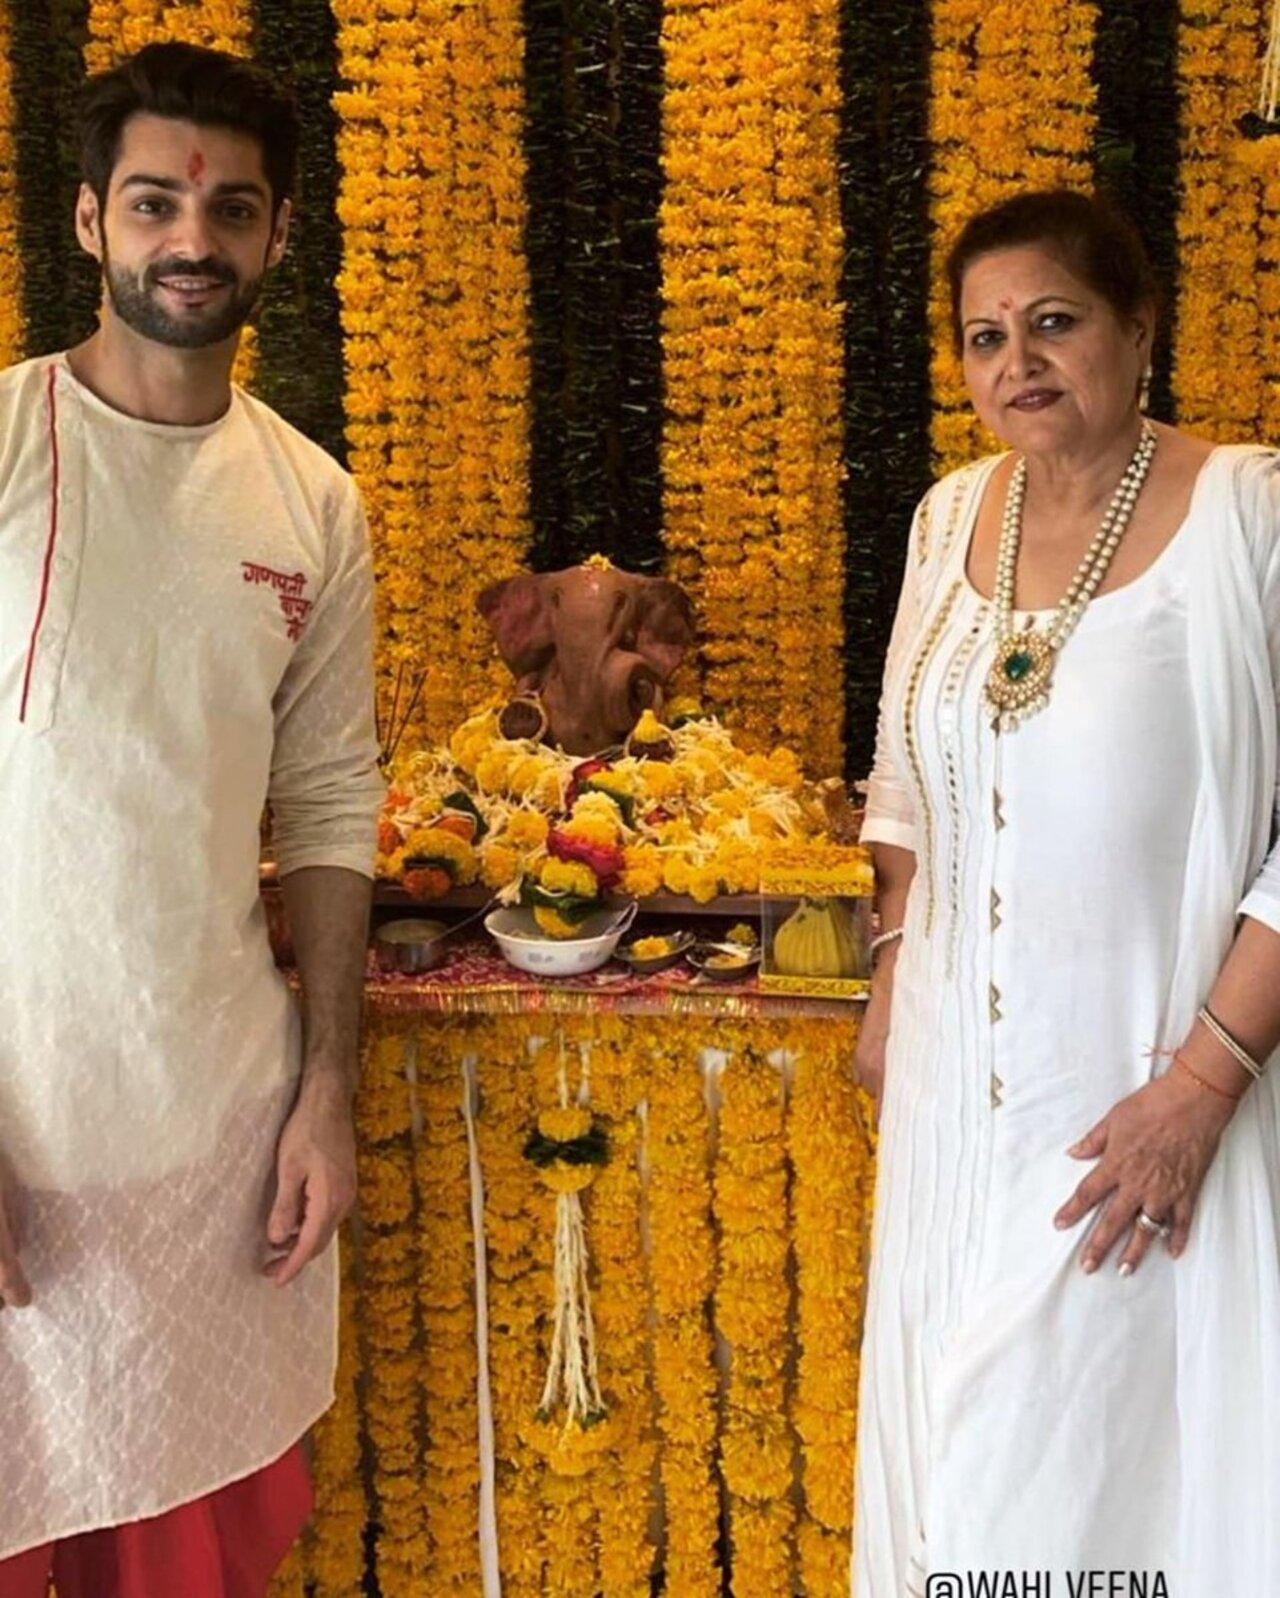 Karan Wahi has been hosting Ganpati at his residence for quite some time now. The actor also learnt the art of carving the idol